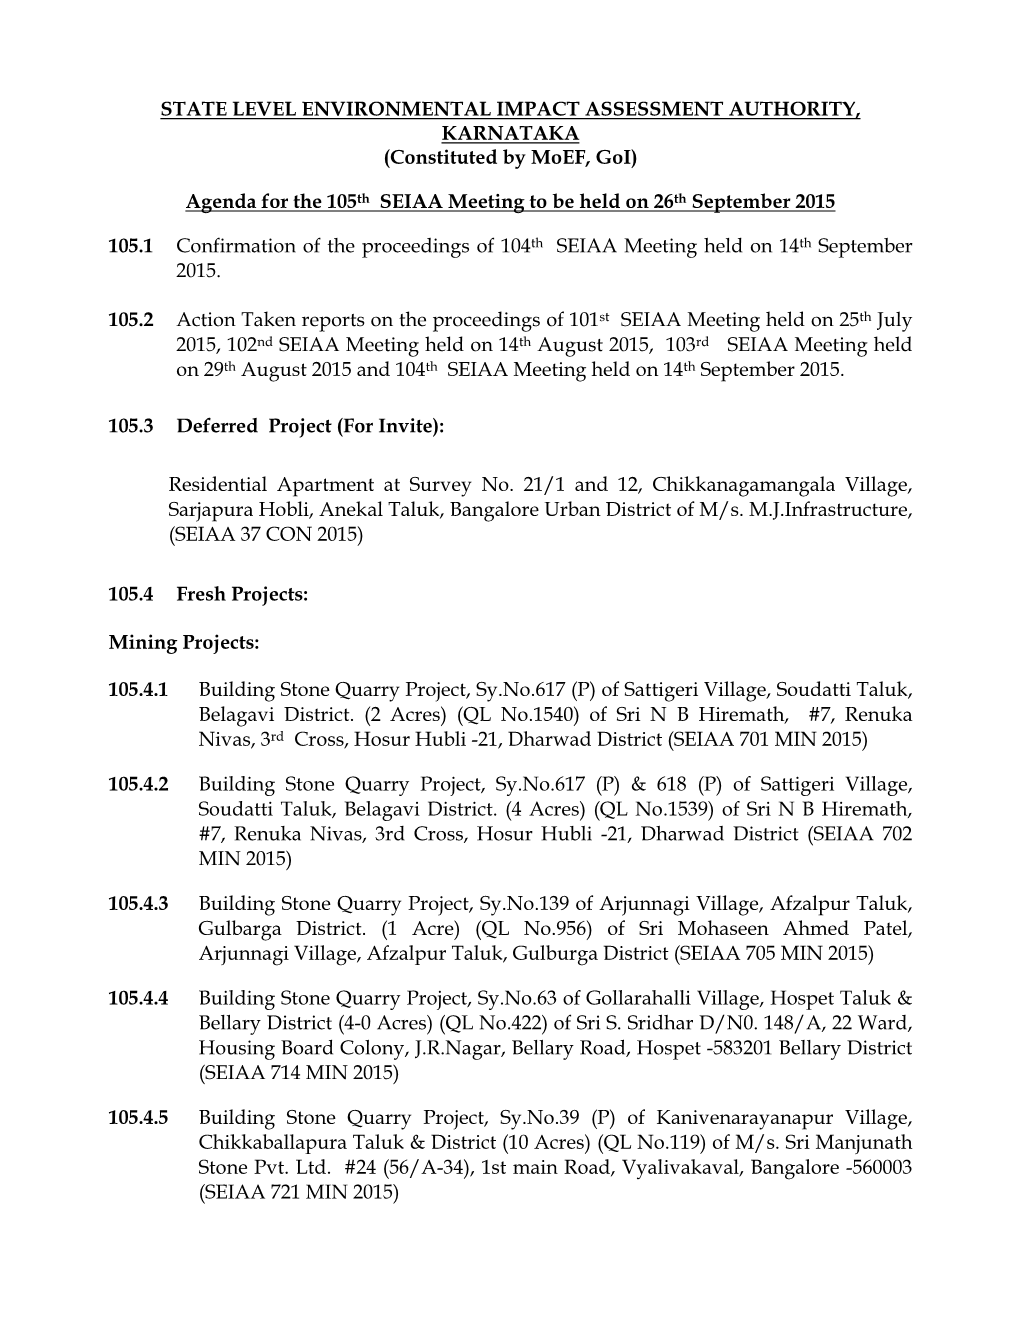 Agenda for the 105Th SEIAA Meeting to Be Held on 26 Th September 2015